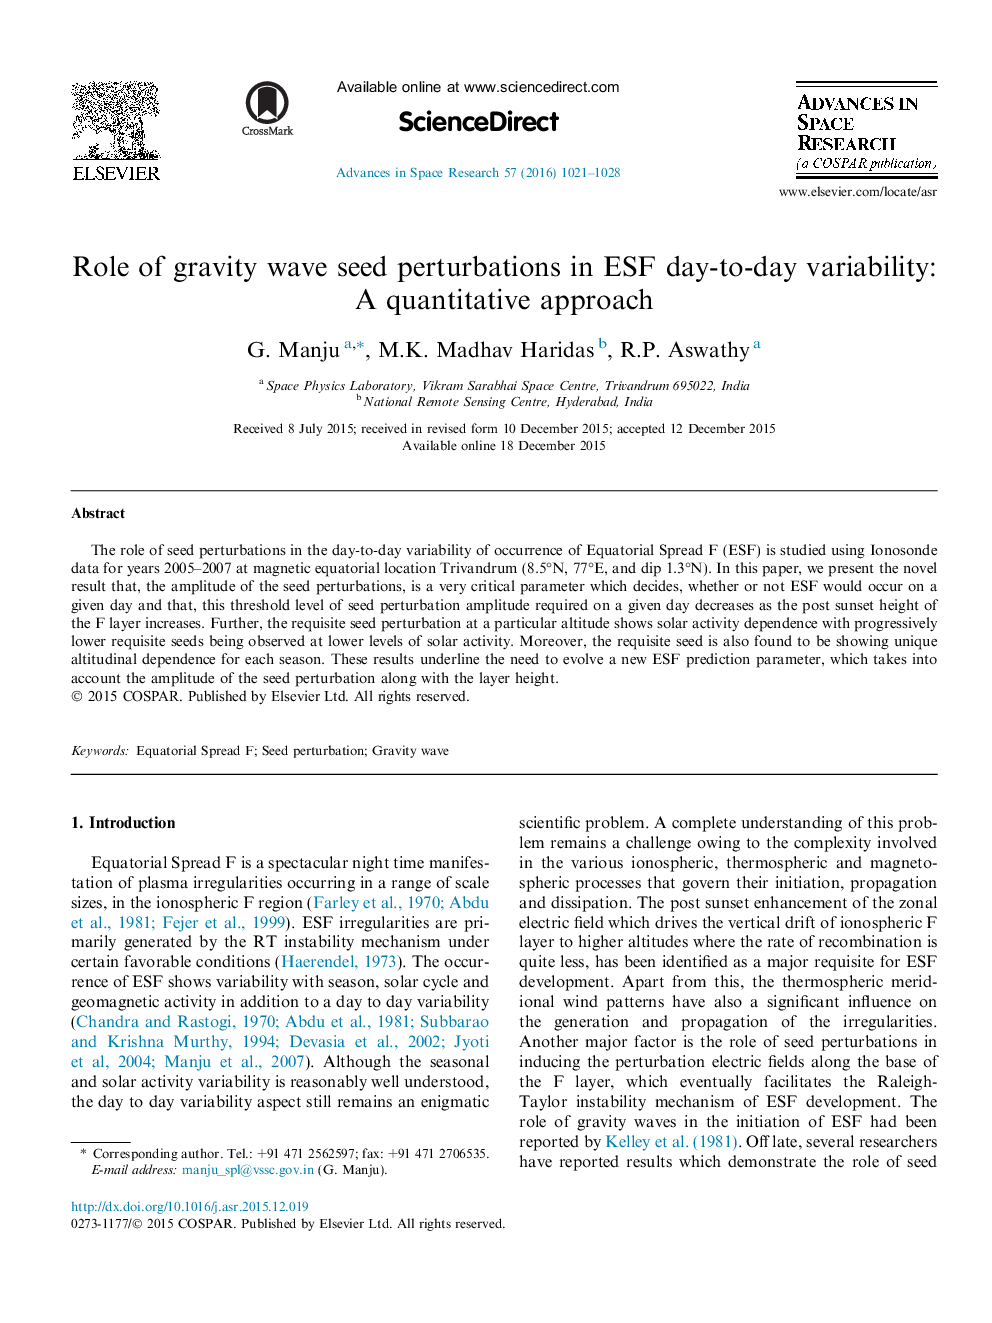 Role of gravity wave seed perturbations in ESF day-to-day variability: A quantitative approach